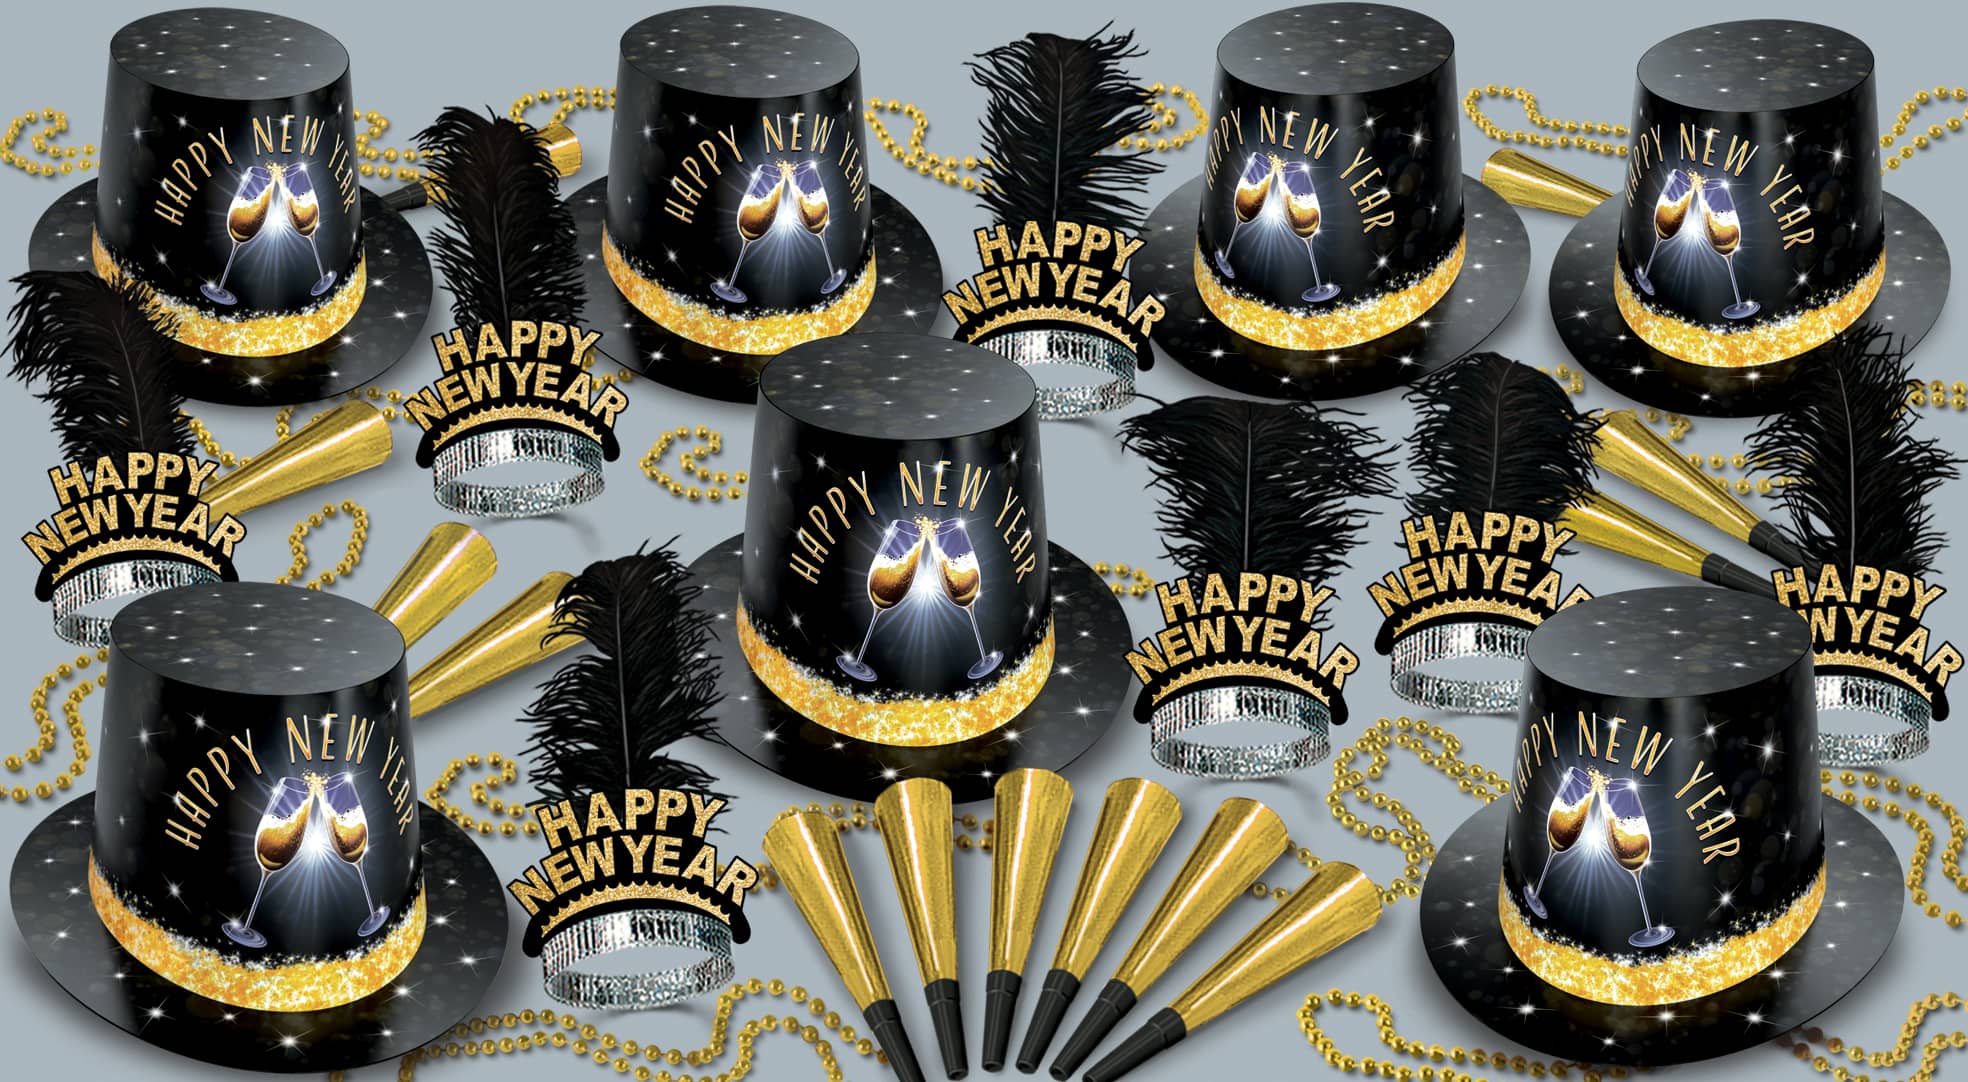 Champagne Toast Assortment for 50 Champagne Toast Assortment for 50, 2022, elegant design, champagne, champagne glasses, black, gold, new years eve, party kit, hat, tiara, horn, beads, wholesale, inexpensive, bulk, party favor